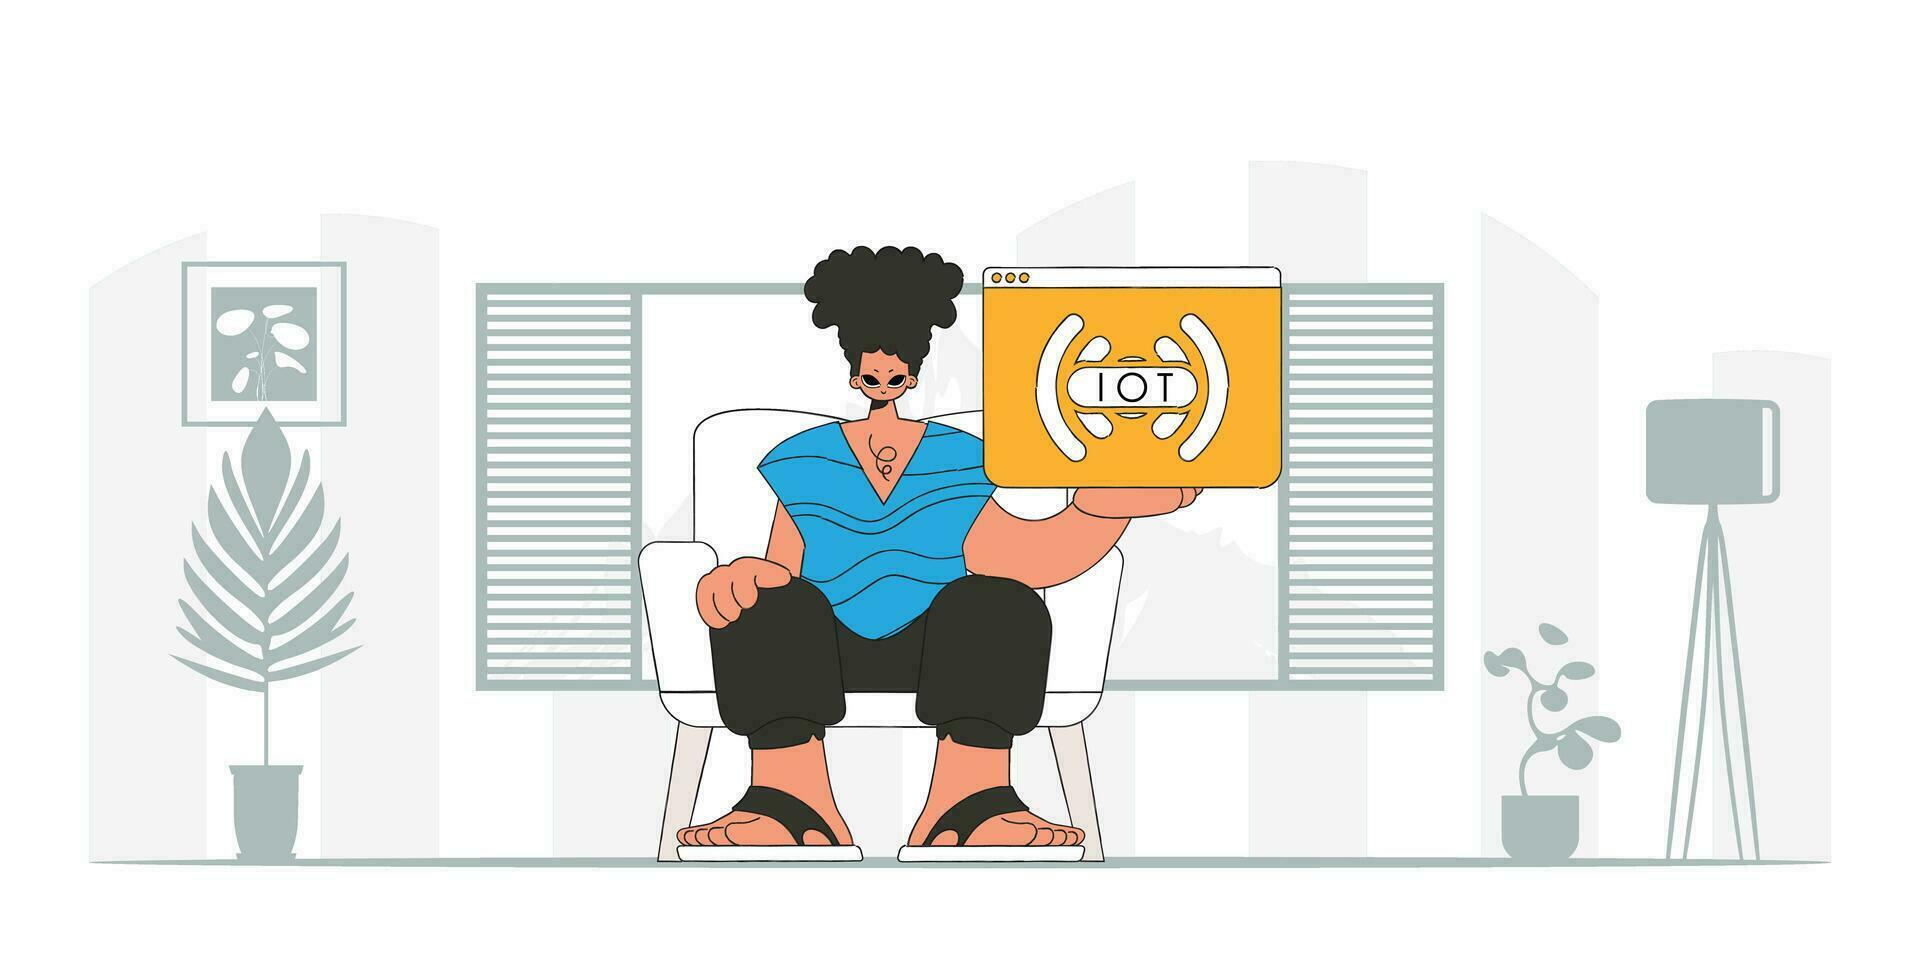 Guy holds IoT logo while seated on the ground, in vector modern character style.